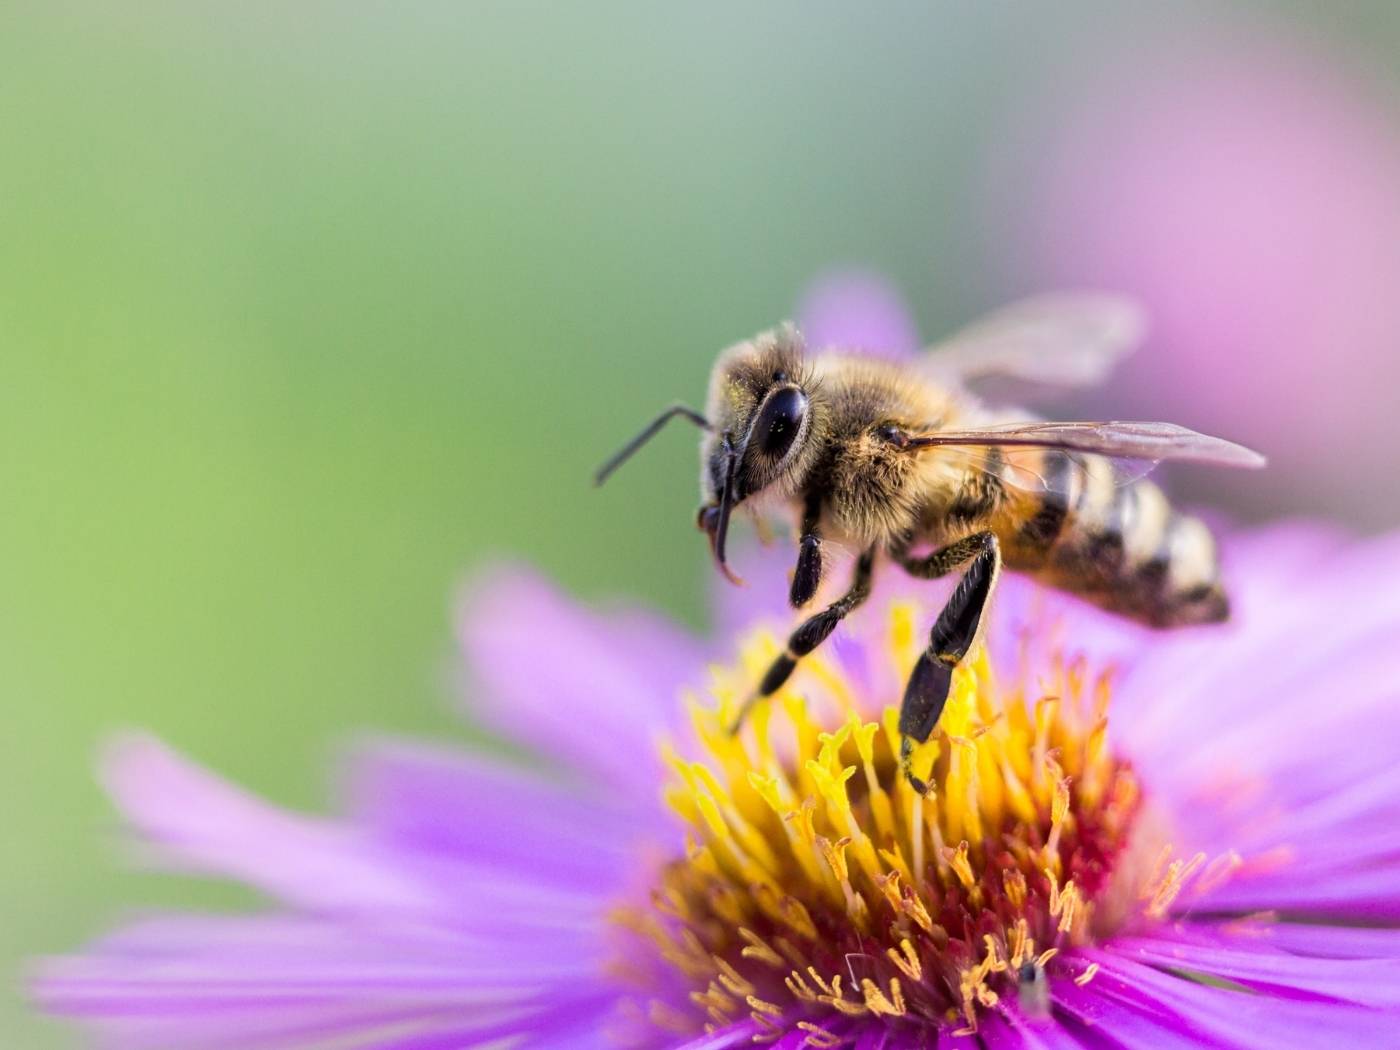 An Urgent Plea to Save the Bees